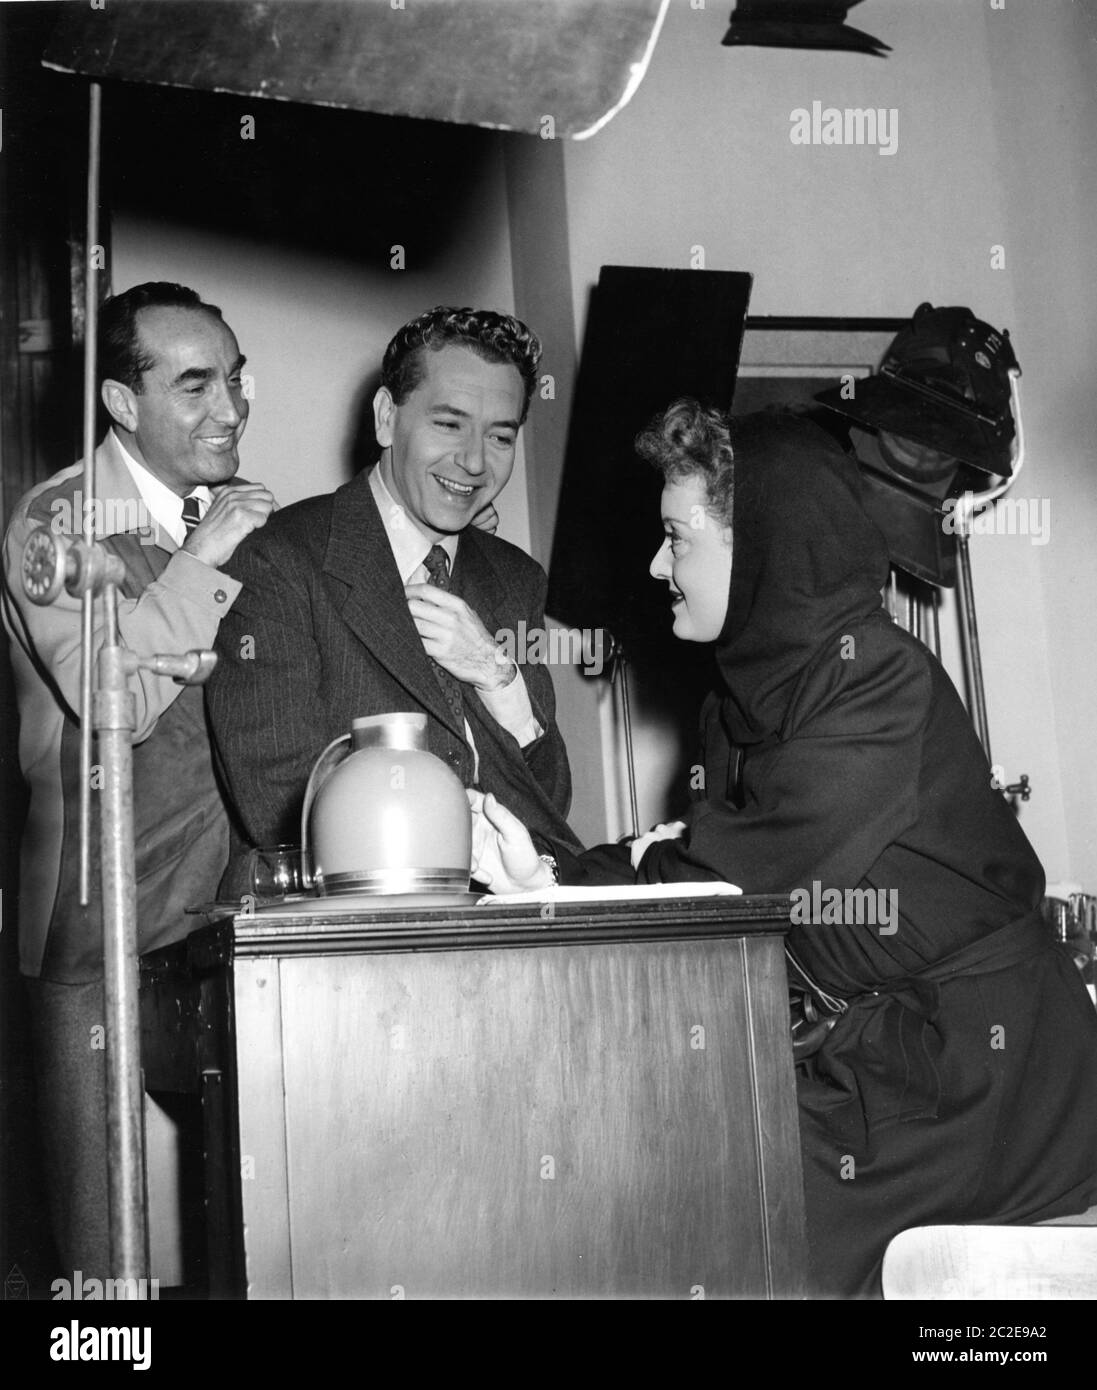 Director IRVING RAPPER PAUL HENRIED and BETTE DAVIS on set candid during filming of DECEPTION 1946 music Erich Wolfgang Korngold Warner Bros. Stock Photo